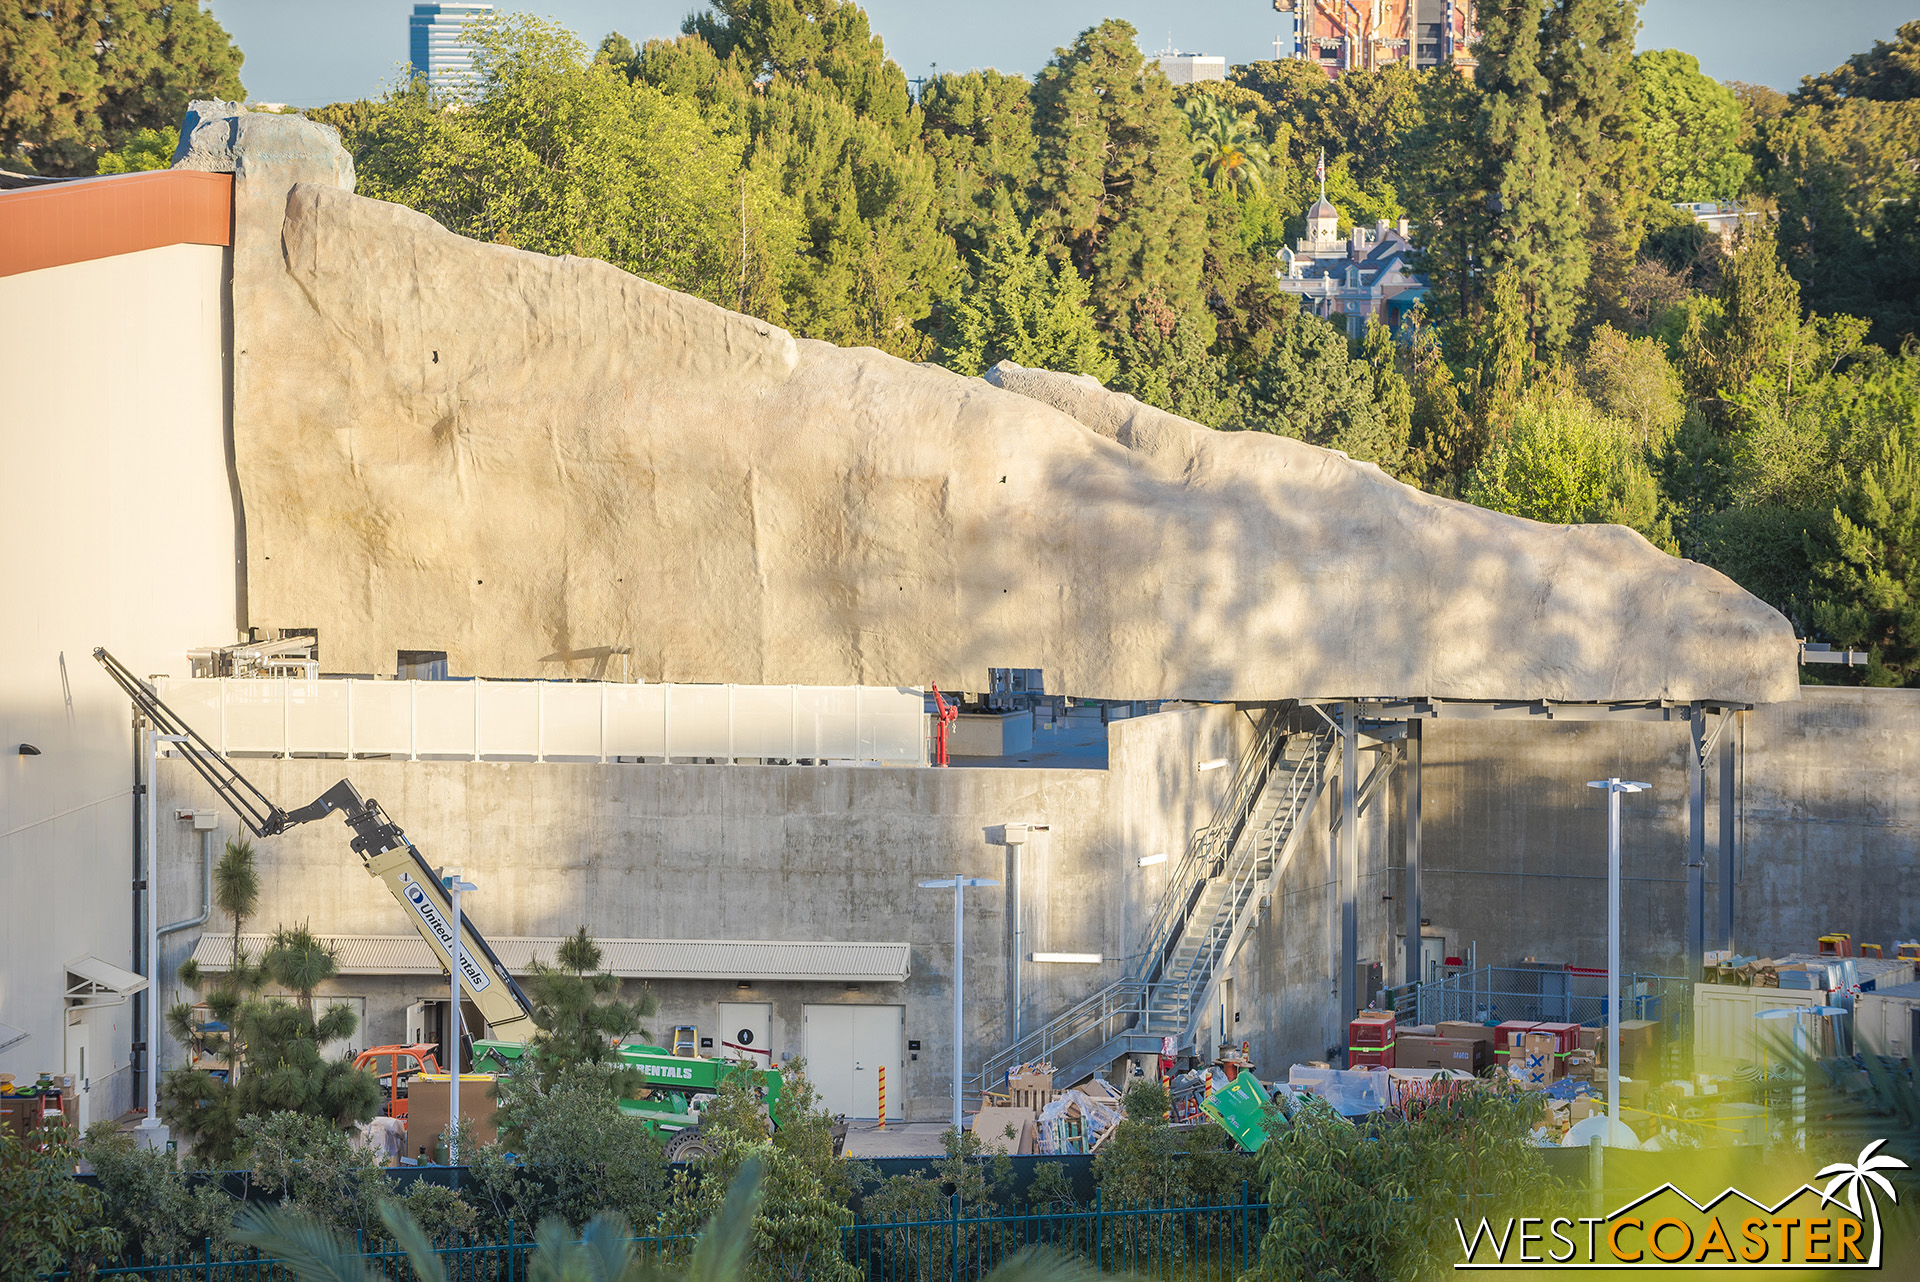  I hope it looks at least presentable from all angles when Galaxy’s Edge opens! 